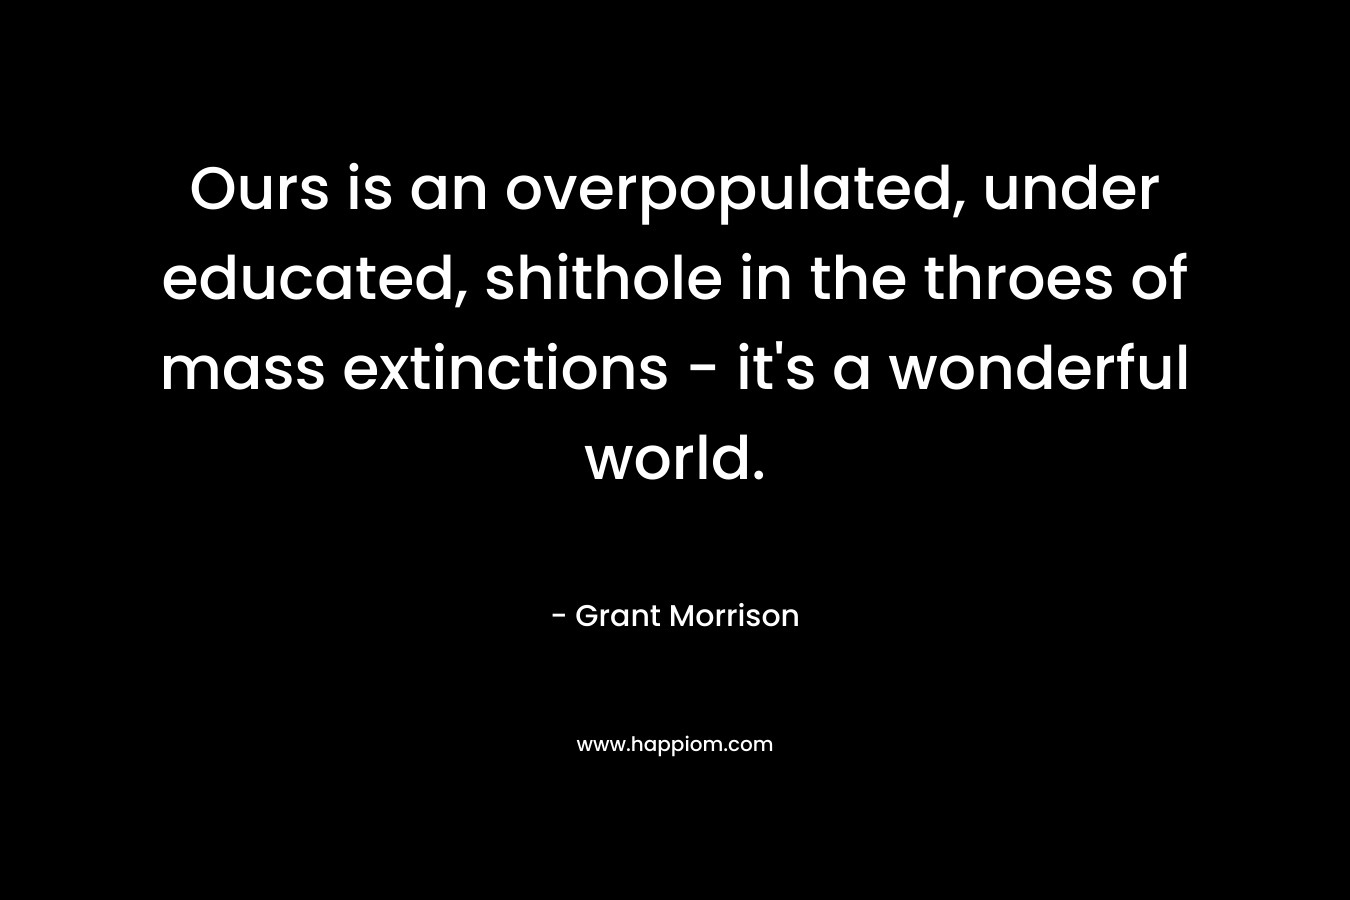 Ours is an overpopulated, under educated, shithole in the throes of mass extinctions – it’s a wonderful world. – Grant Morrison